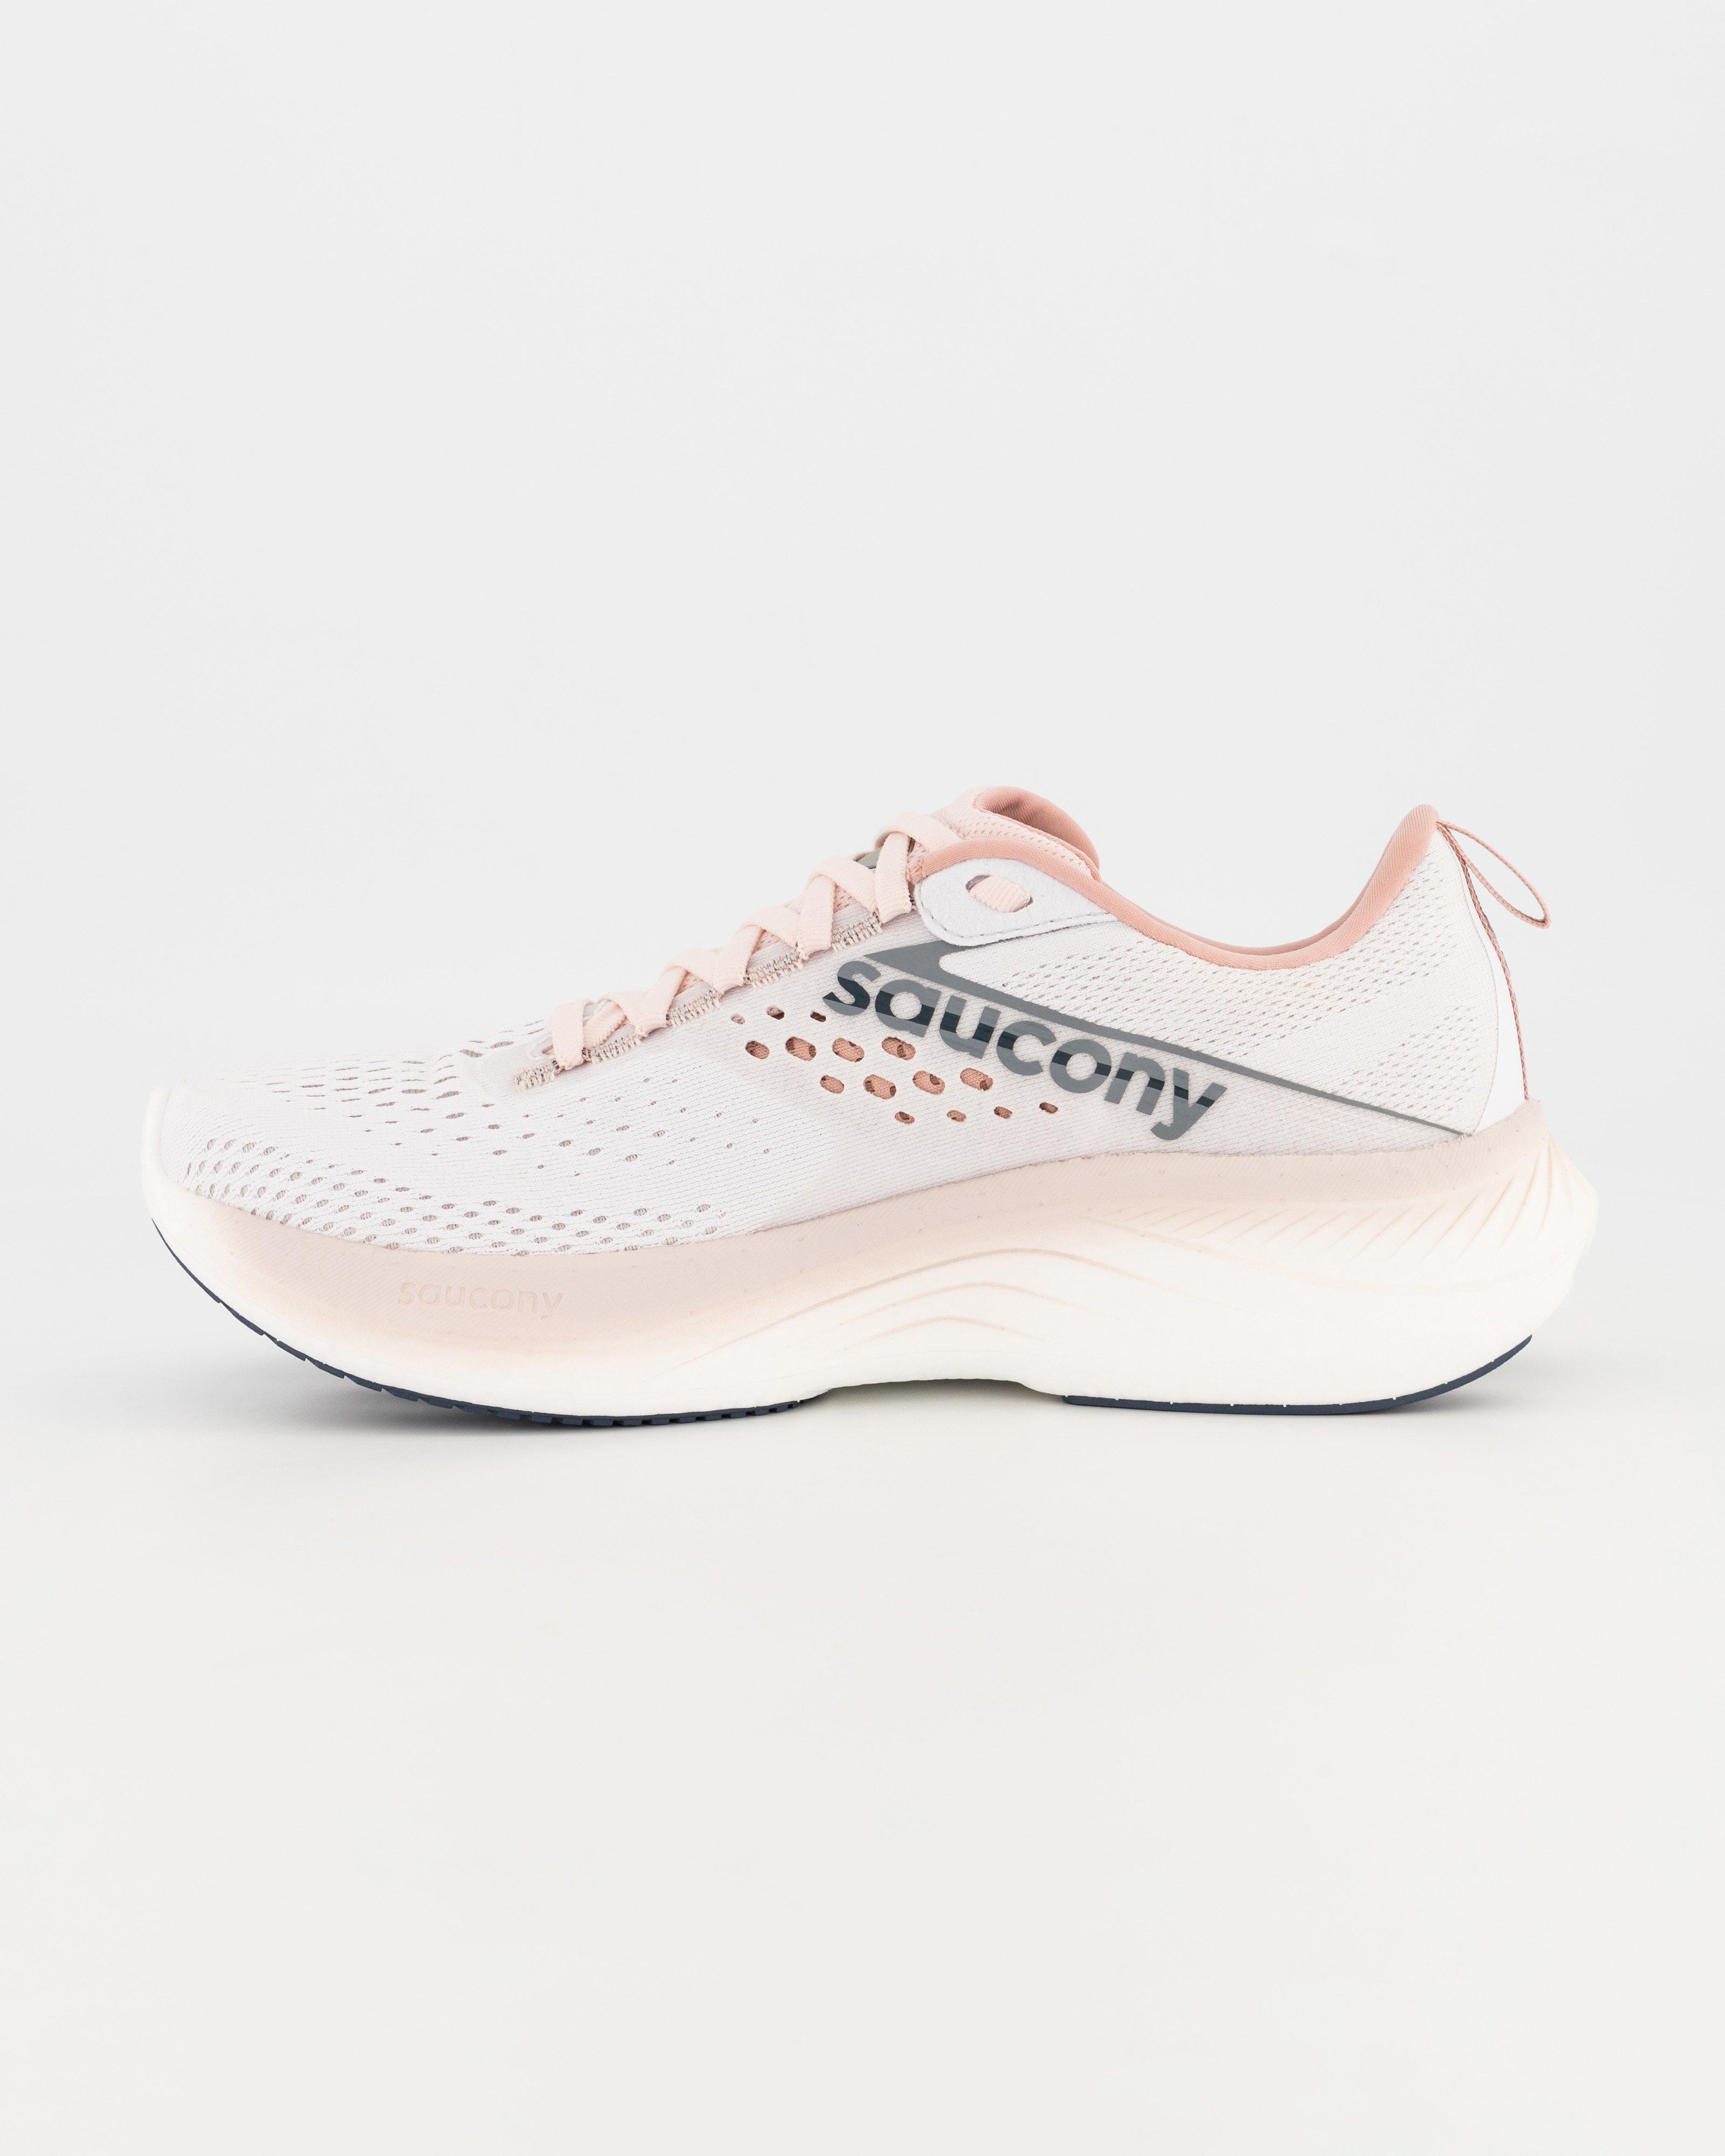 Saucony Women’s Ride 17 Road Running Shoes -  White